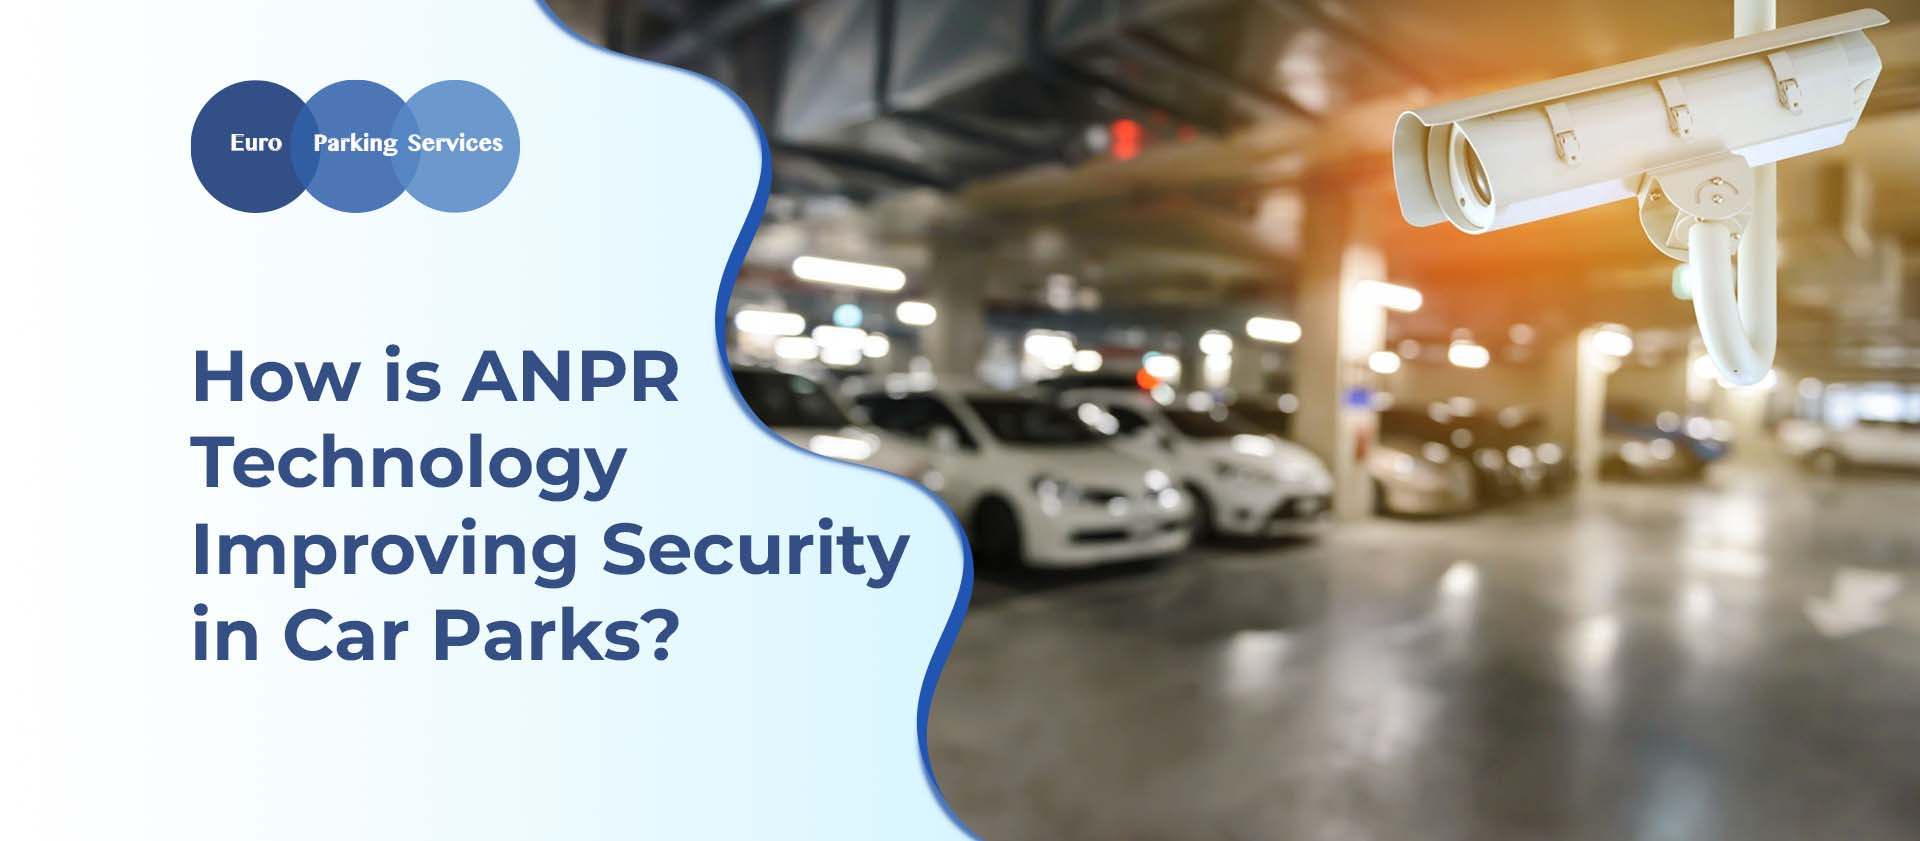 How is ANPR Technology Improving Security in Parking Lots?How is ANPR Technology Improving Security in Parking Lots?